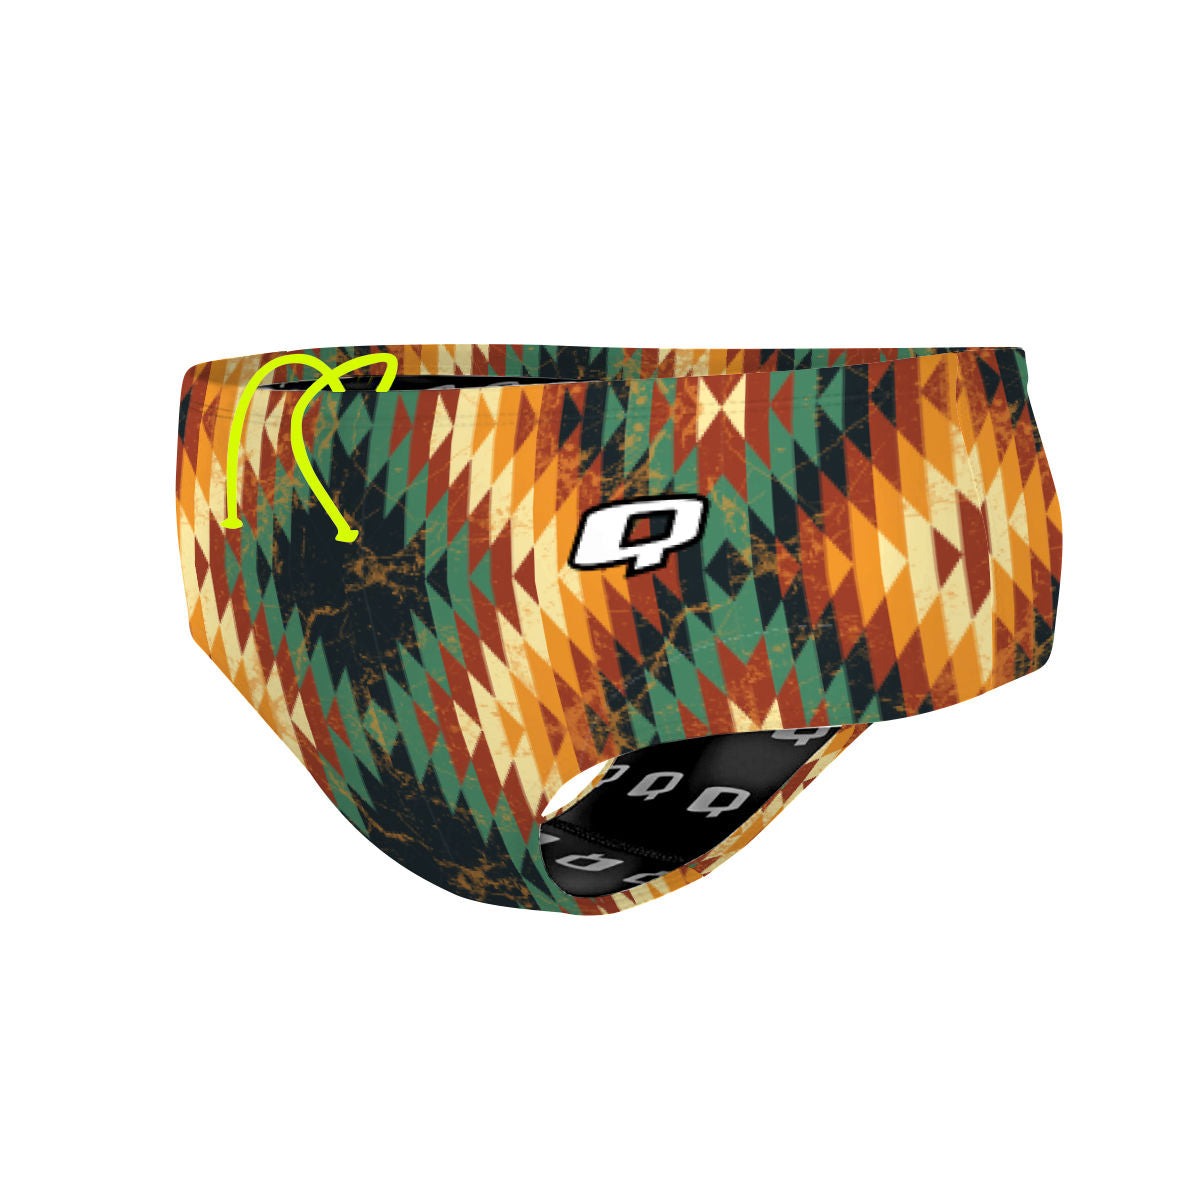 Tribal Fall Classic Brief Swimsuit